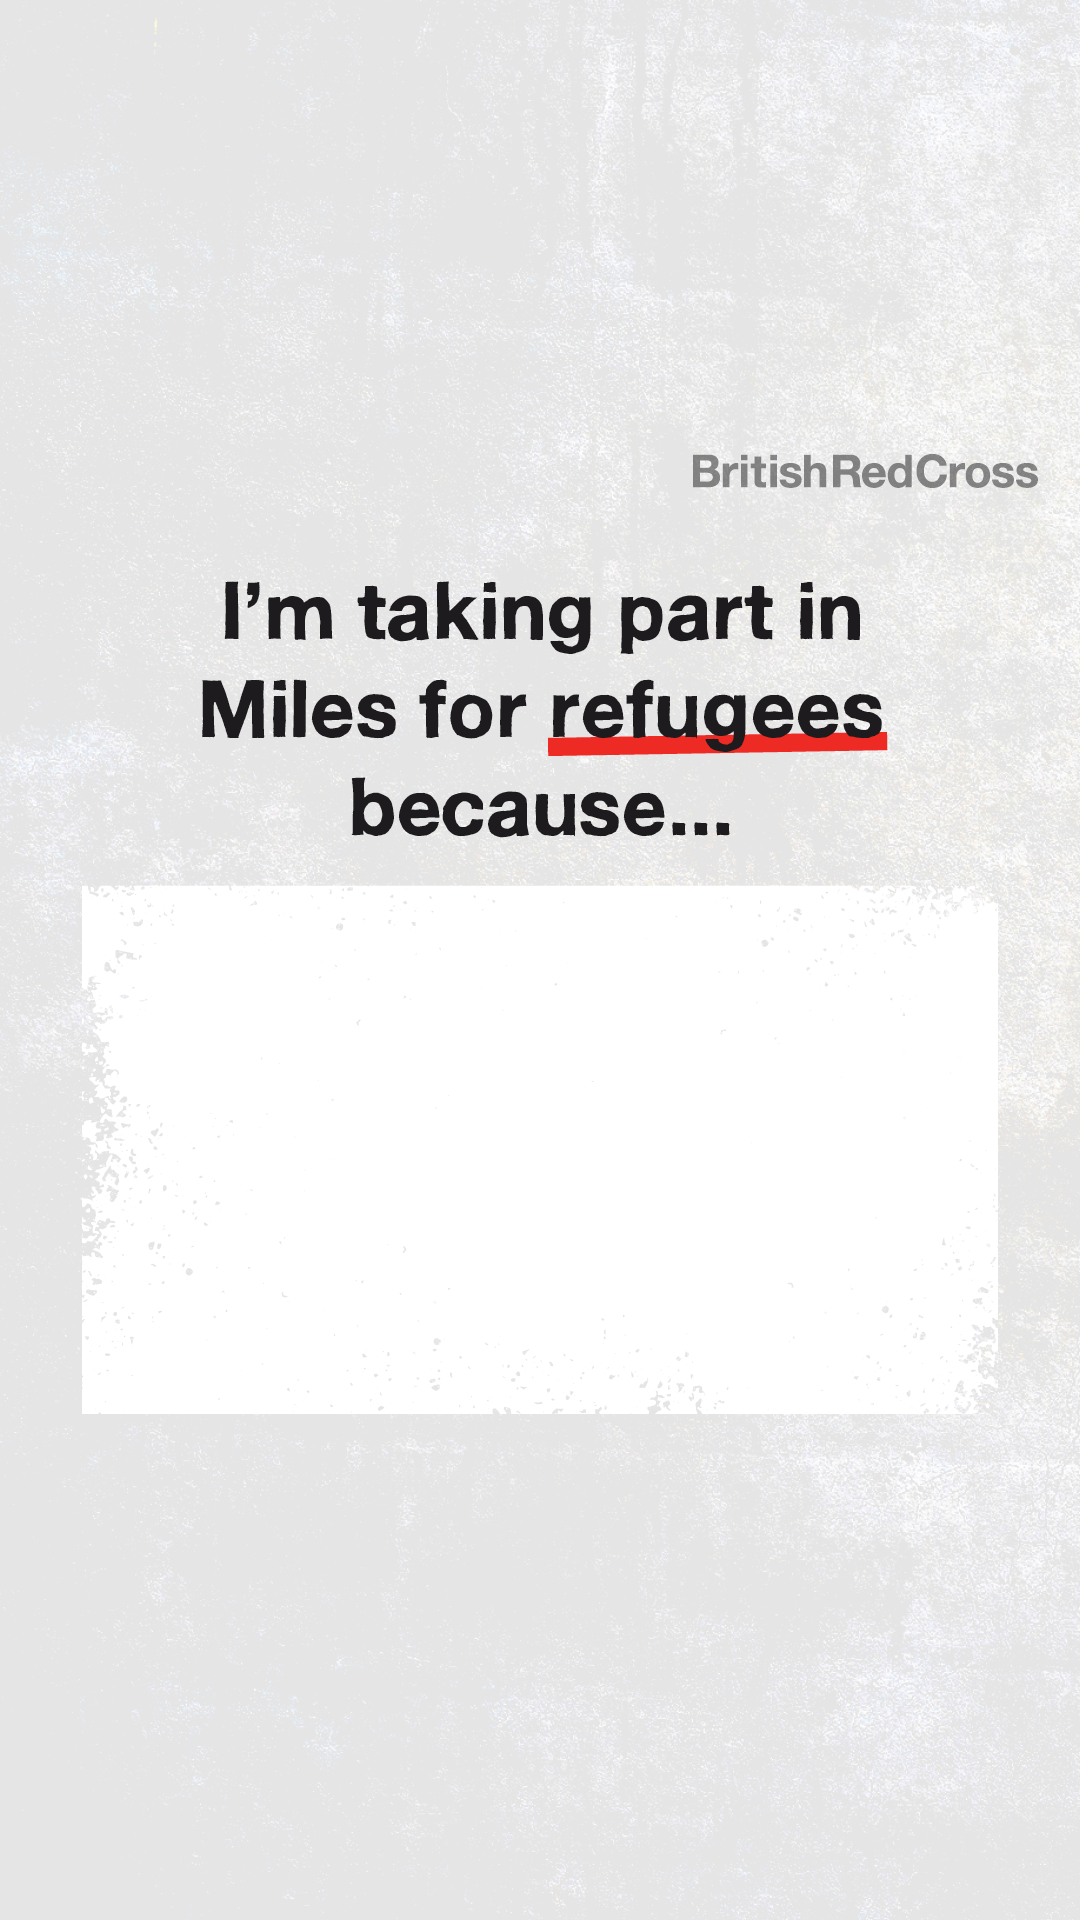 Text of I'm taking part in Miles for refugees because written on a grey background